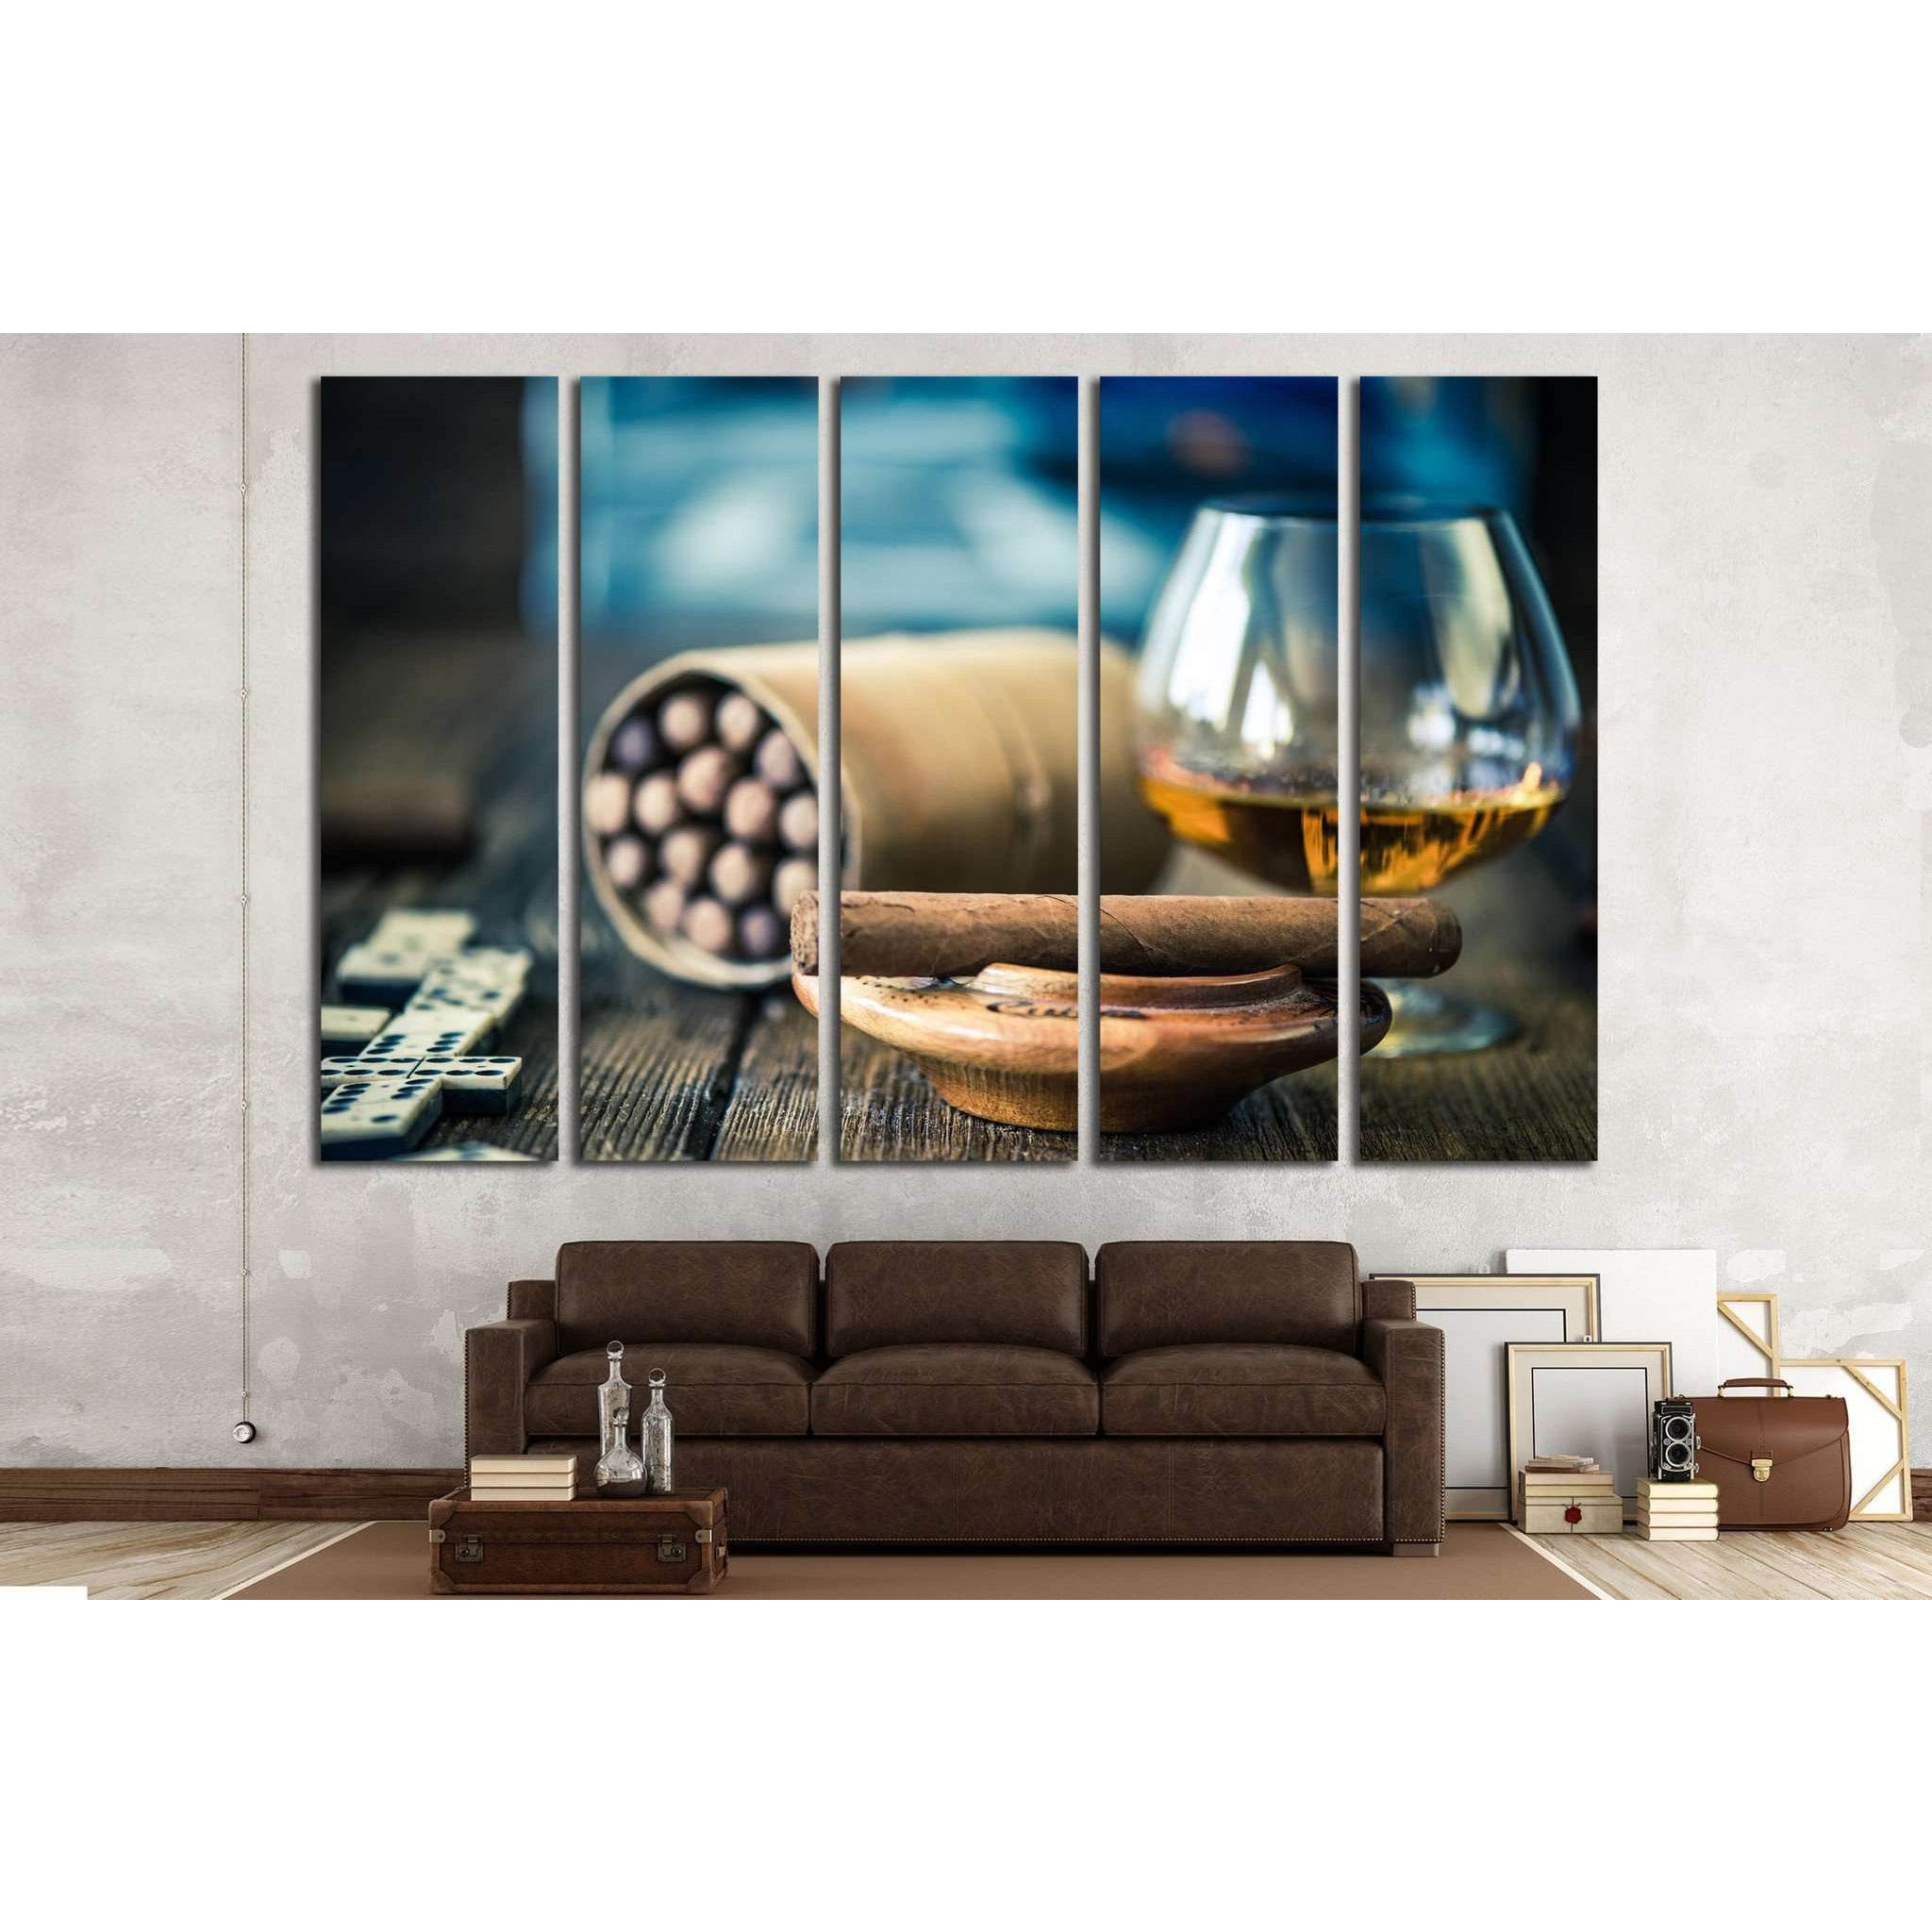 Cigars and Glass №536 Ready to Hang Canvas Print